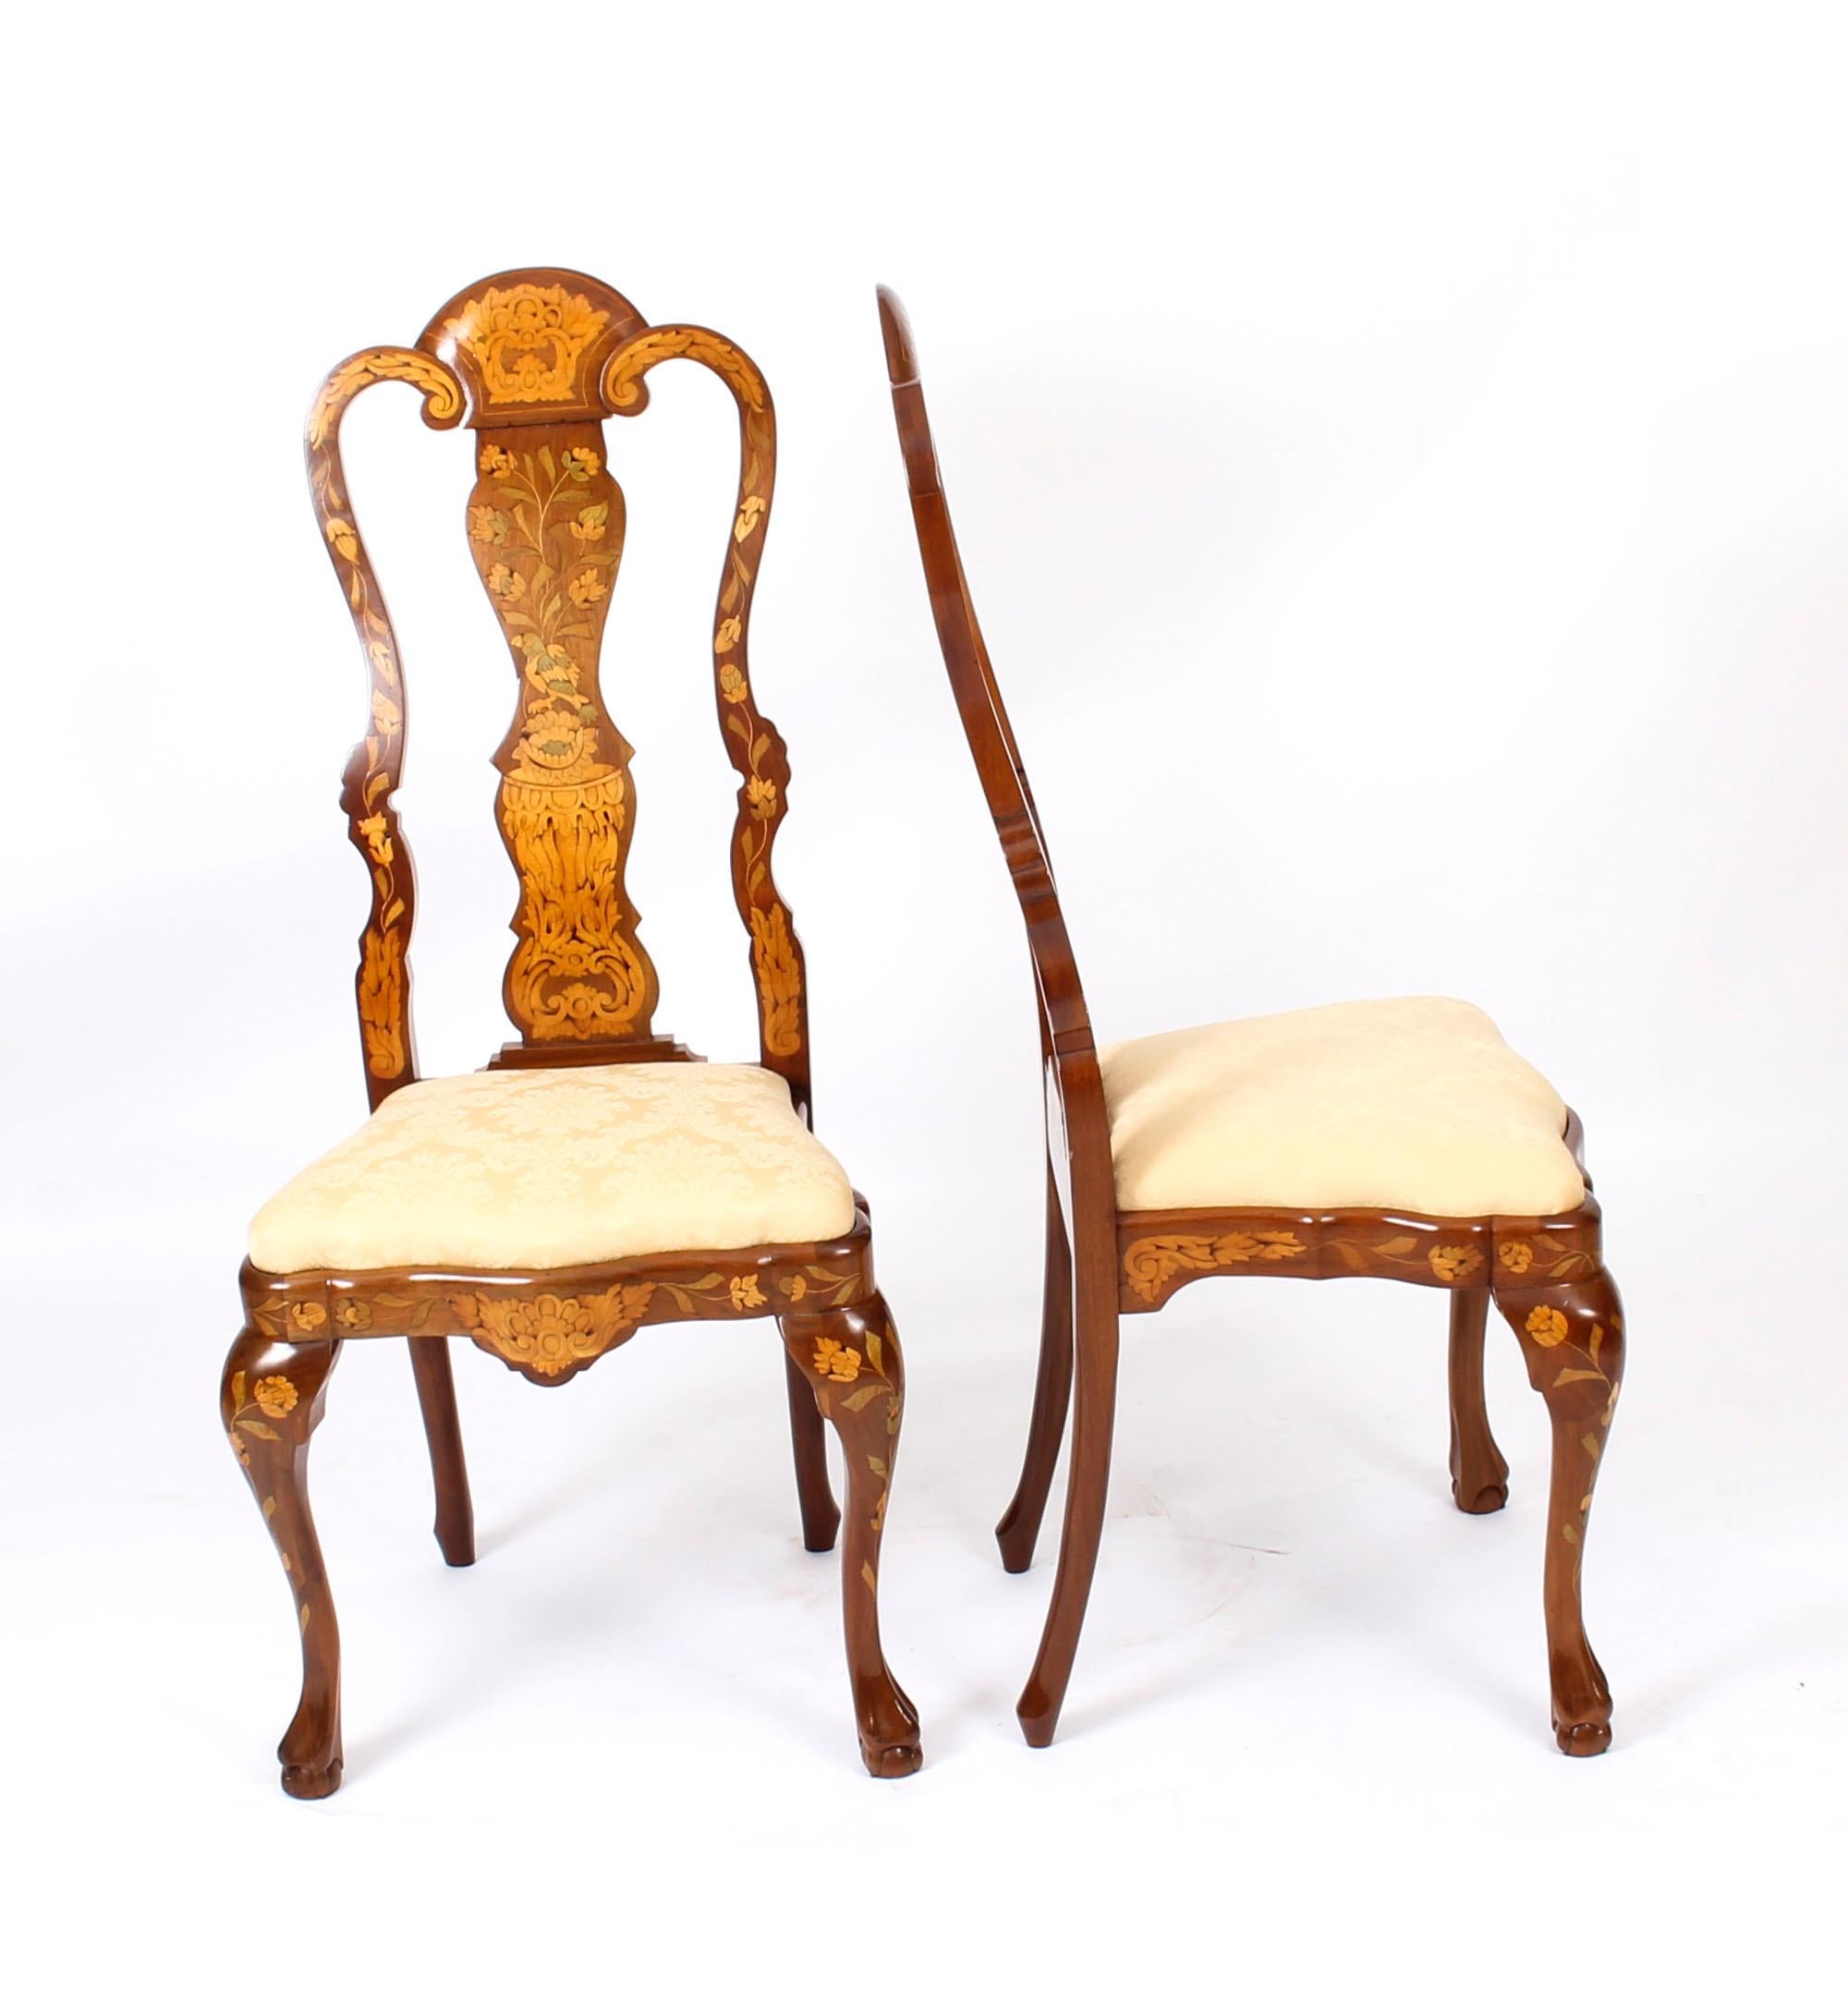 This is a stunning and rare pair of antique high backed Dutch walnut and floral marquetry dining chairs, typical of the very best late 19th century Dutch furniture. 

The chairs have been skillfully crafted from walnut, and bear profuse floral and